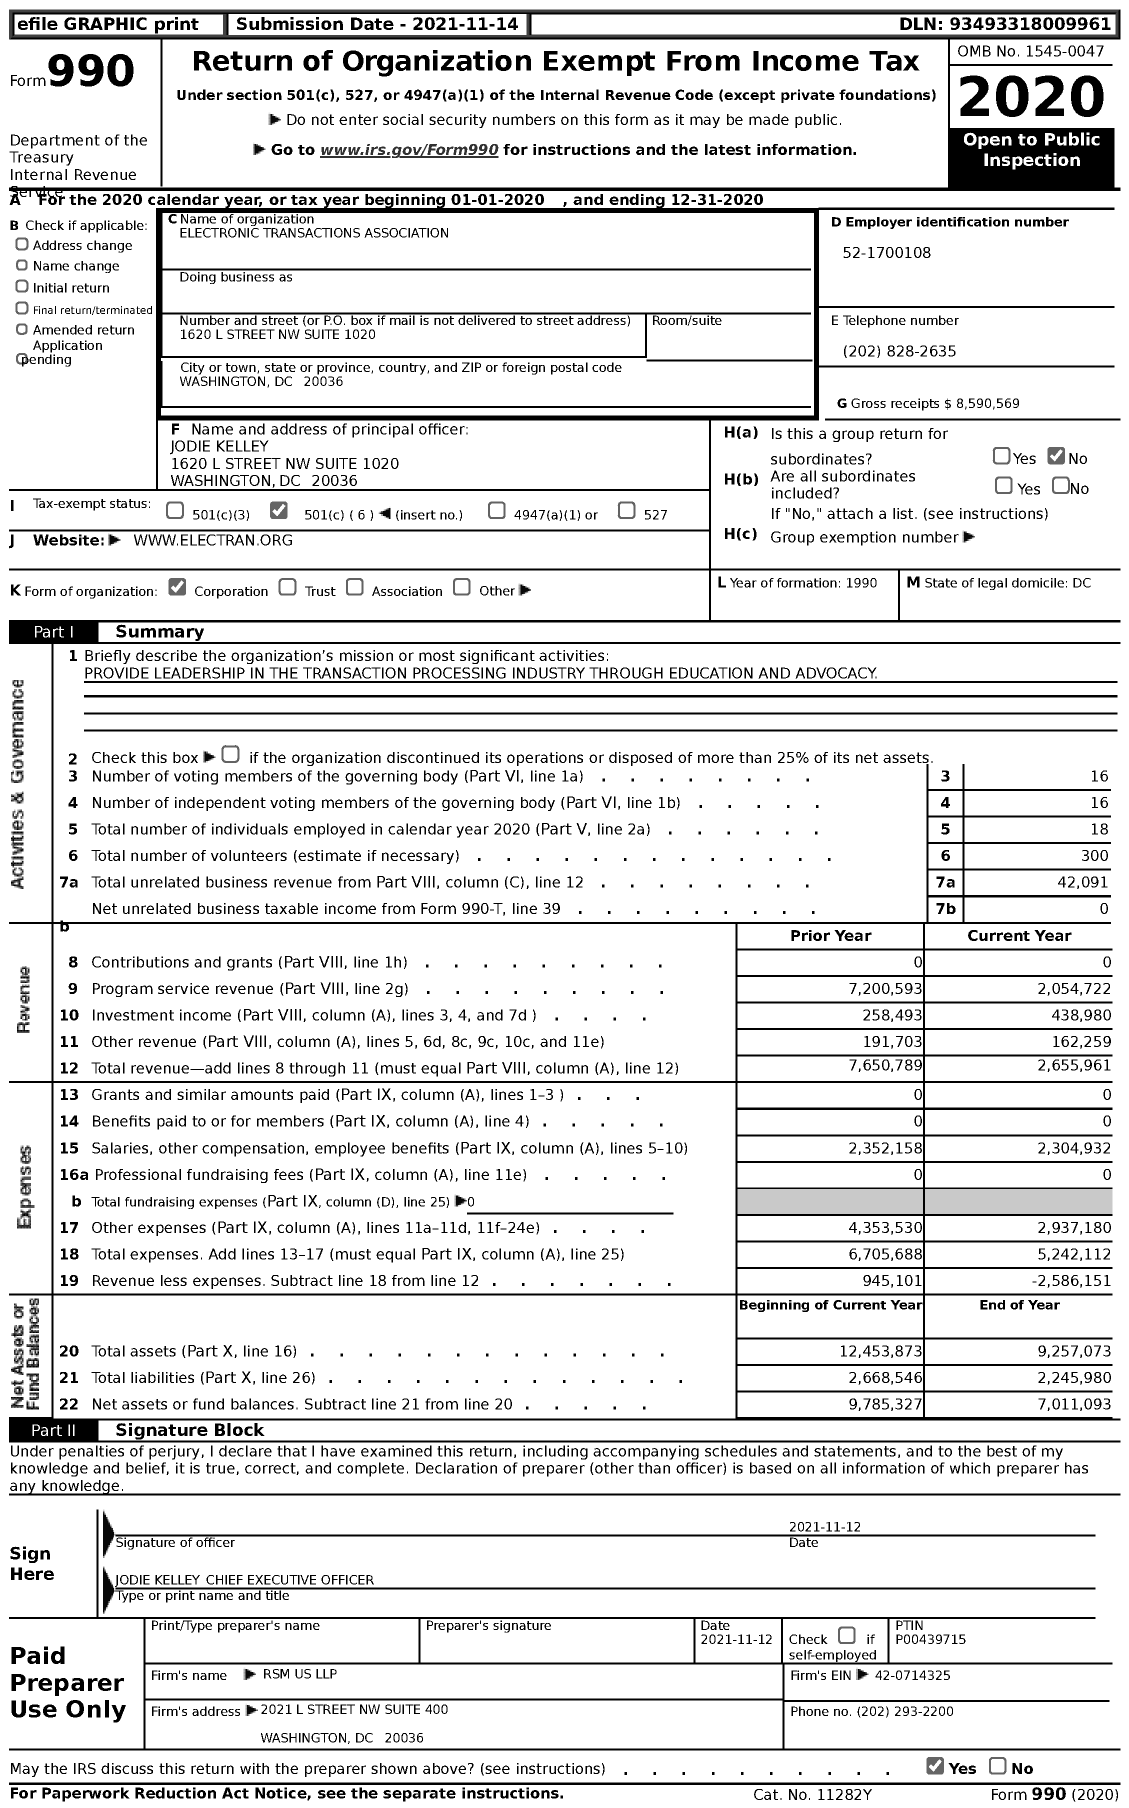 Image of first page of 2020 Form 990 for Electronic Transactions Association (ETA)